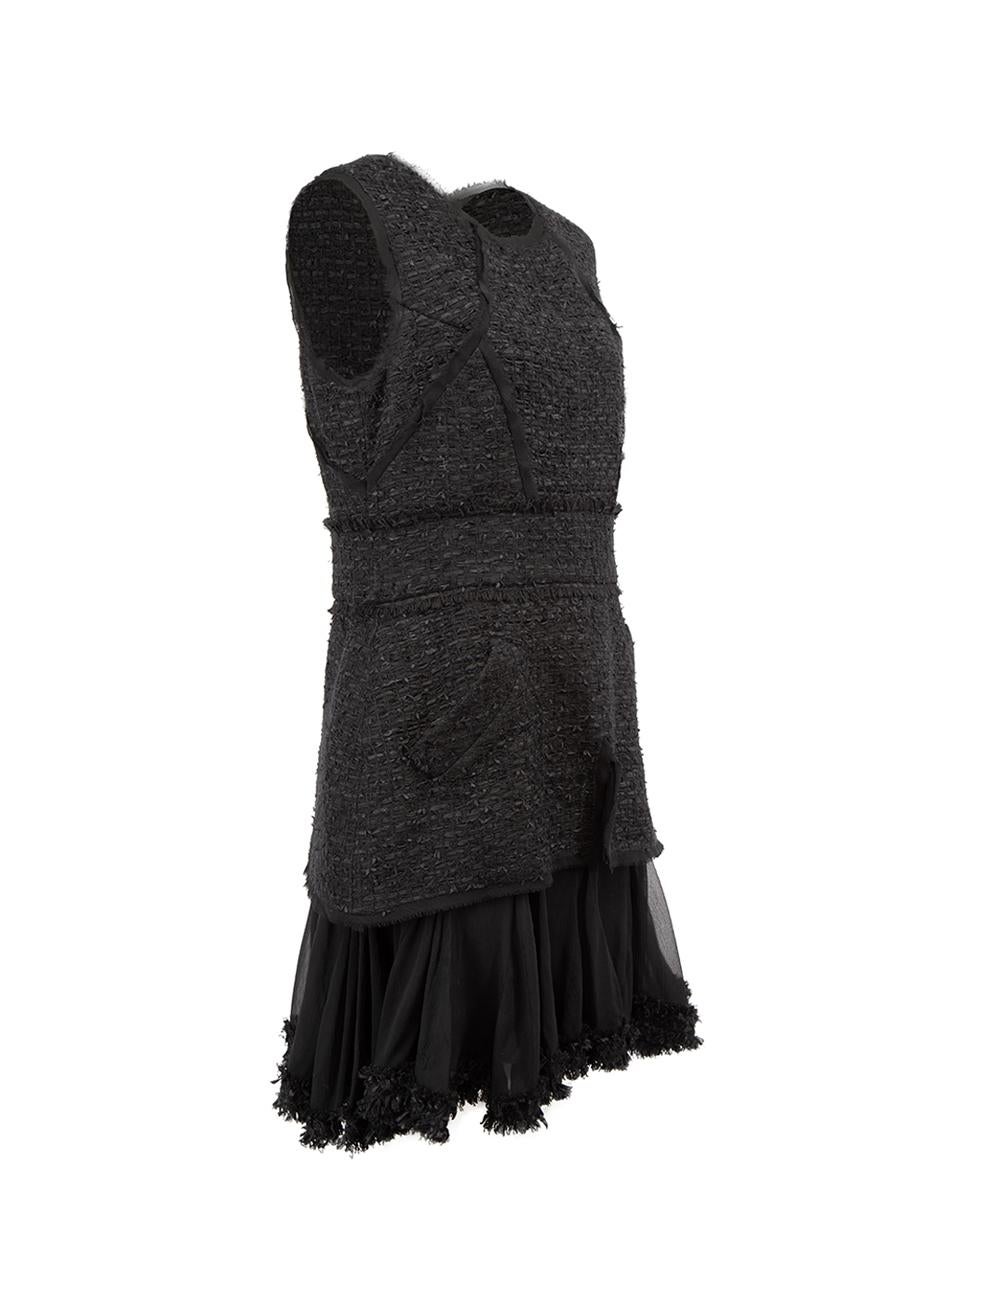 CONDITION is Very good. Minimal wear to dress is evident. Minimal wear to the left-side of underskirt with small hole on this used Oscar de la Renta designer resale item.



Details


Black

Tweed

Knee length dress

Layered accent

Round